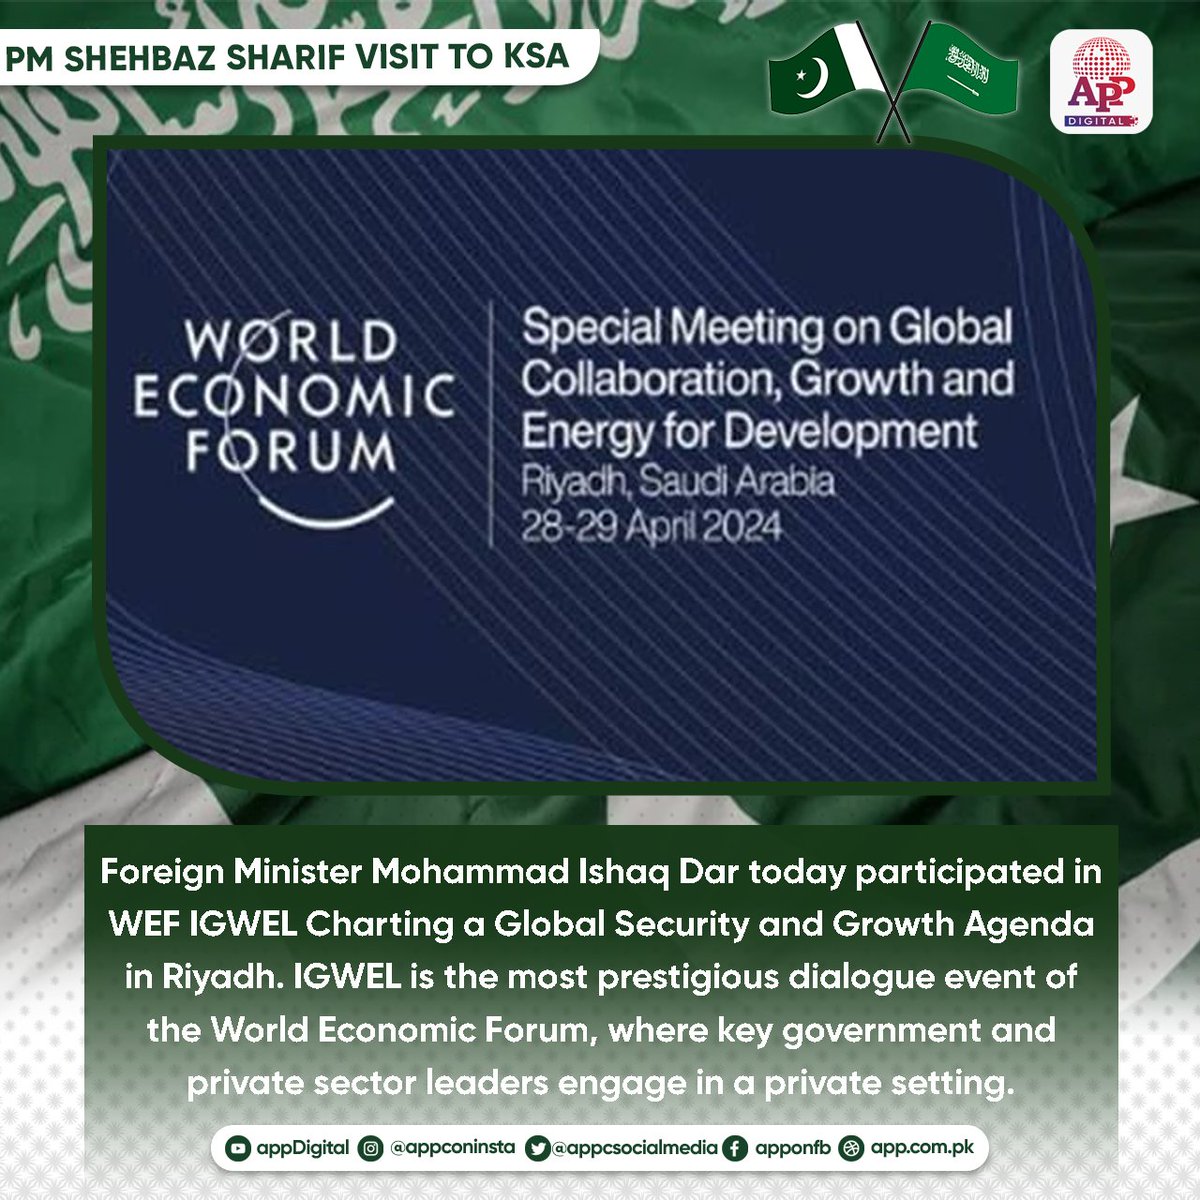 Foreign Minister Mohammad Ishaq Dar @MIshaqDar50 today participated in WEF IGWEL Charting a Global Security and Growth Agenda in Riyadh. IGWEL is the most prestigious dialogue event of the World Economic Forum, where key government and private sector leaders engage in a private…